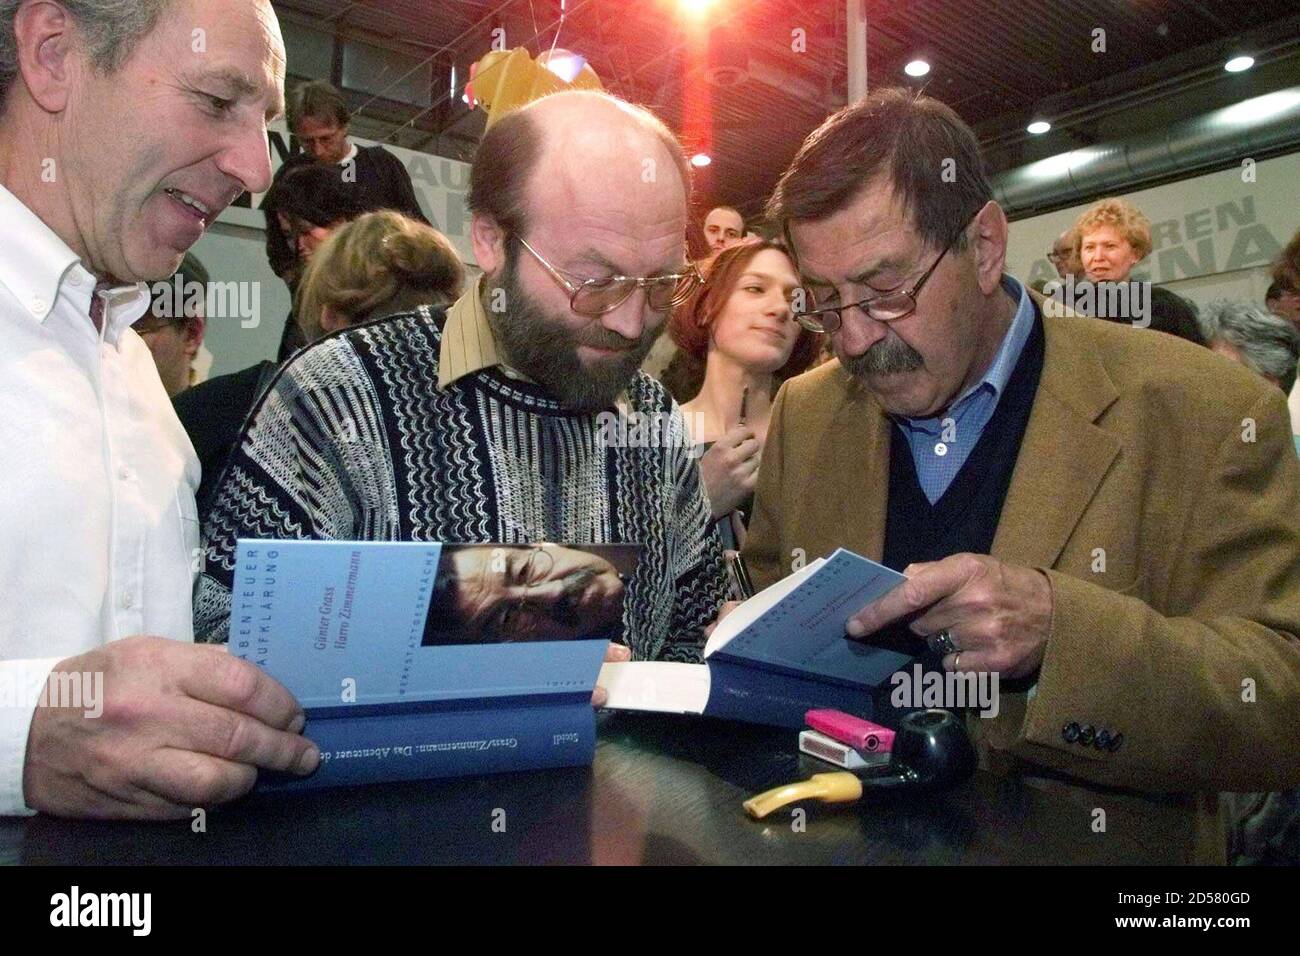 Famous German writer Guenter Grass (R) signs his new book 'Vom Abenteuer der Aufklaerung', which translates as 'About the Adventure of Enlightenment', at Leipzig's book fair March 27. The book fair takes place until March 28.  JE/JRE Stock Photo